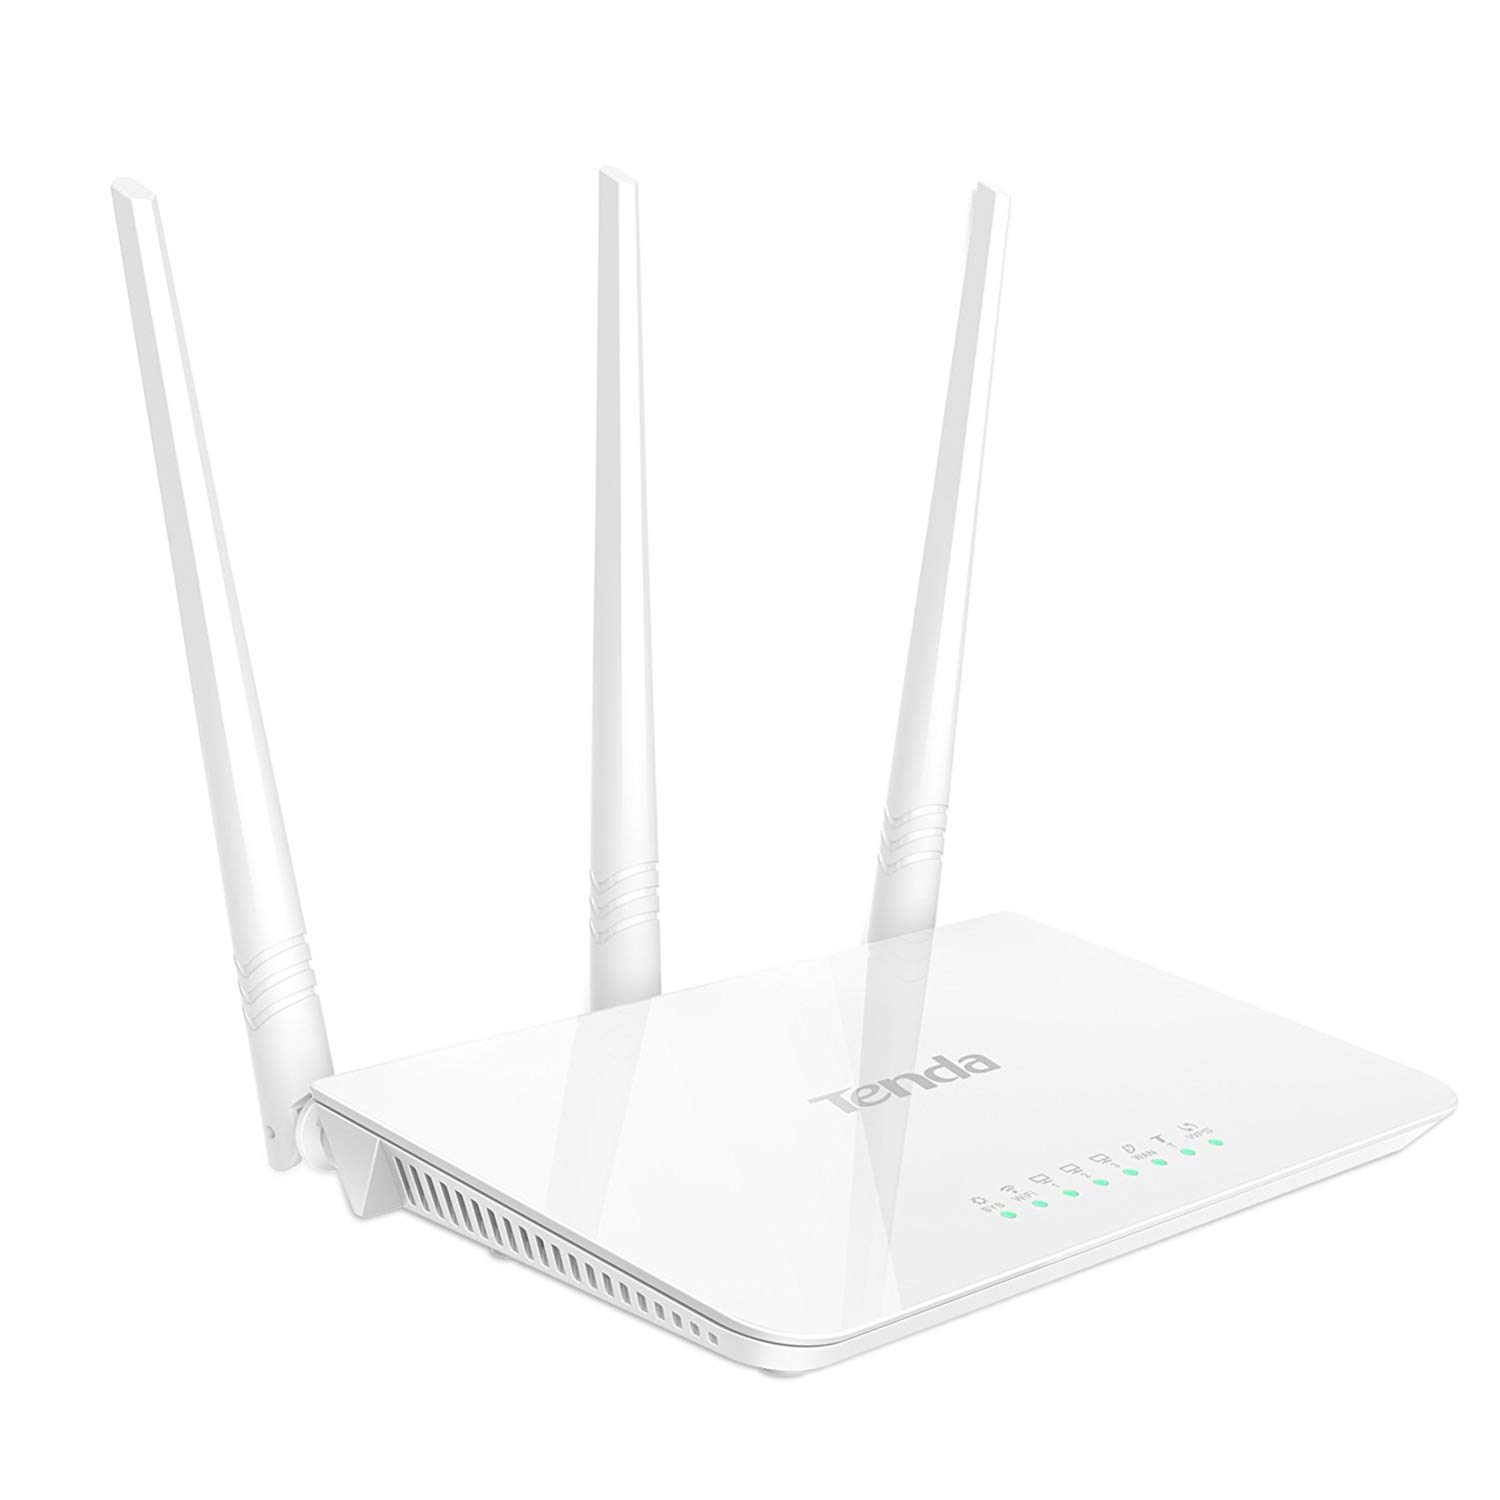 Router Wifi Tenda F3 300Mbps solo 17,4 €